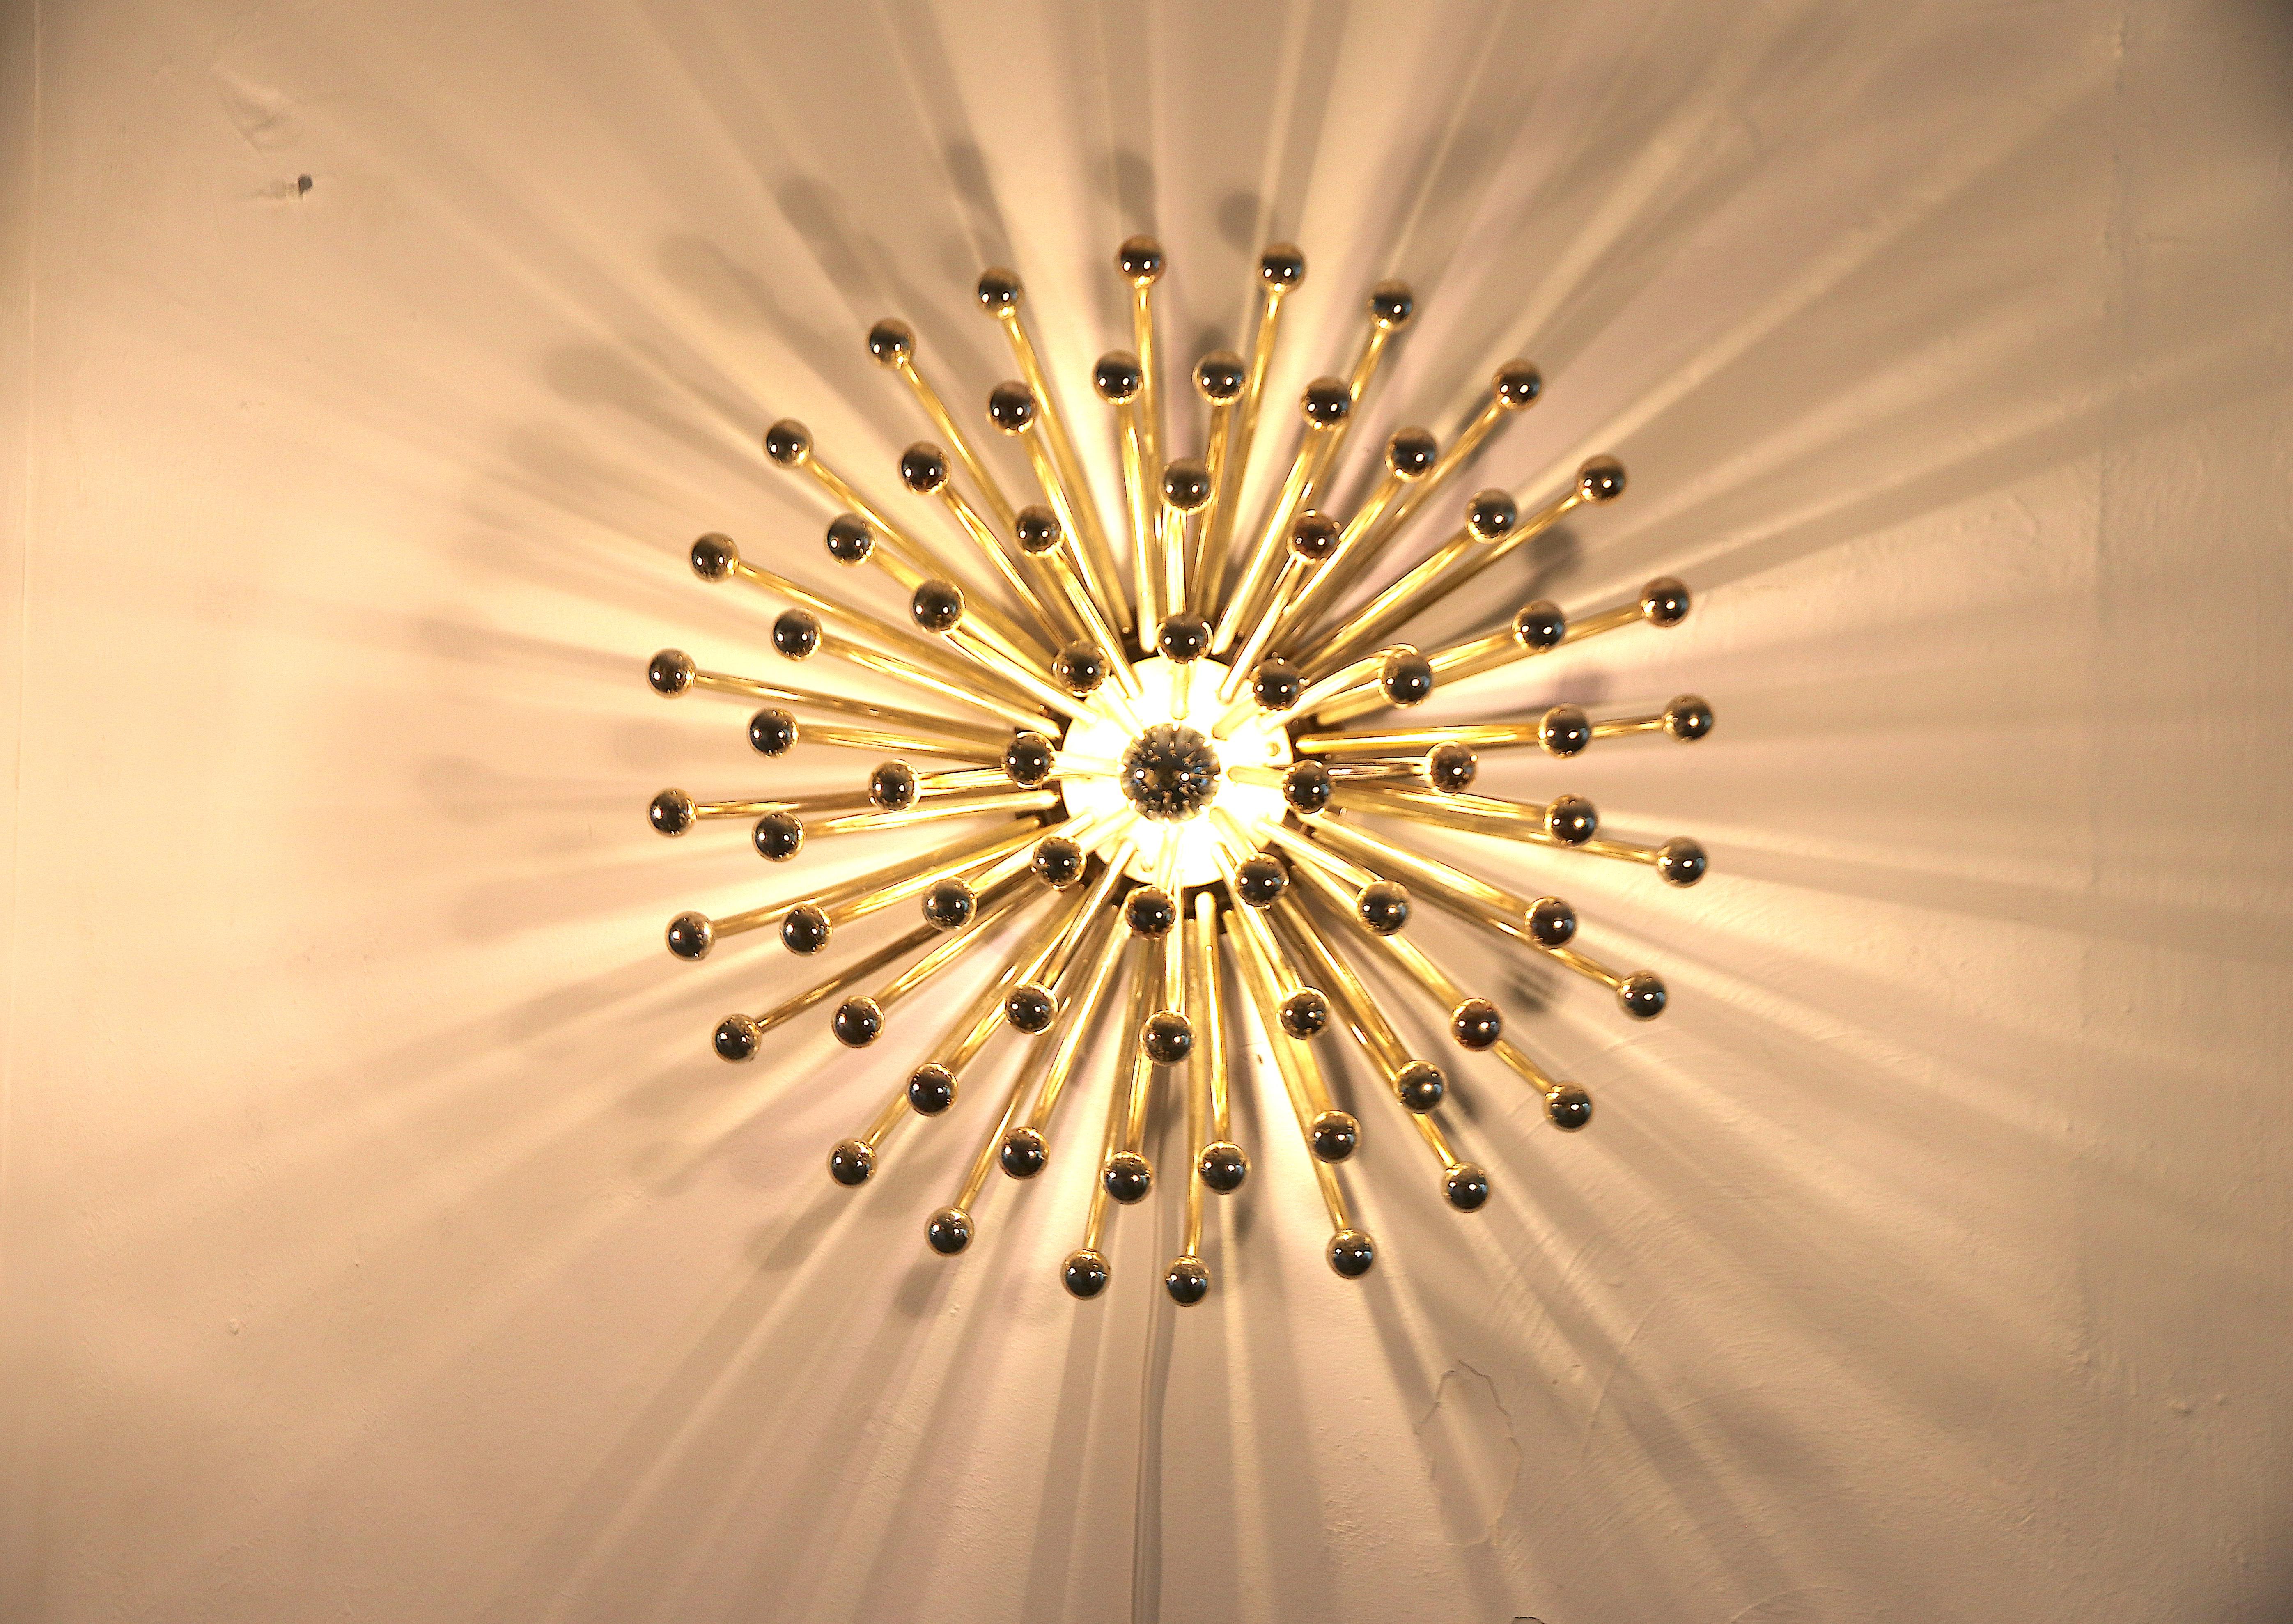 The large gold versions of the Pistillo lamps are extremely rare. Original signed Studio Tetrarch - Milano, Italy 1970's wall light (can also be used as ceiling light) made of gold plated ABS plastic. This is a true all-time design classic and is